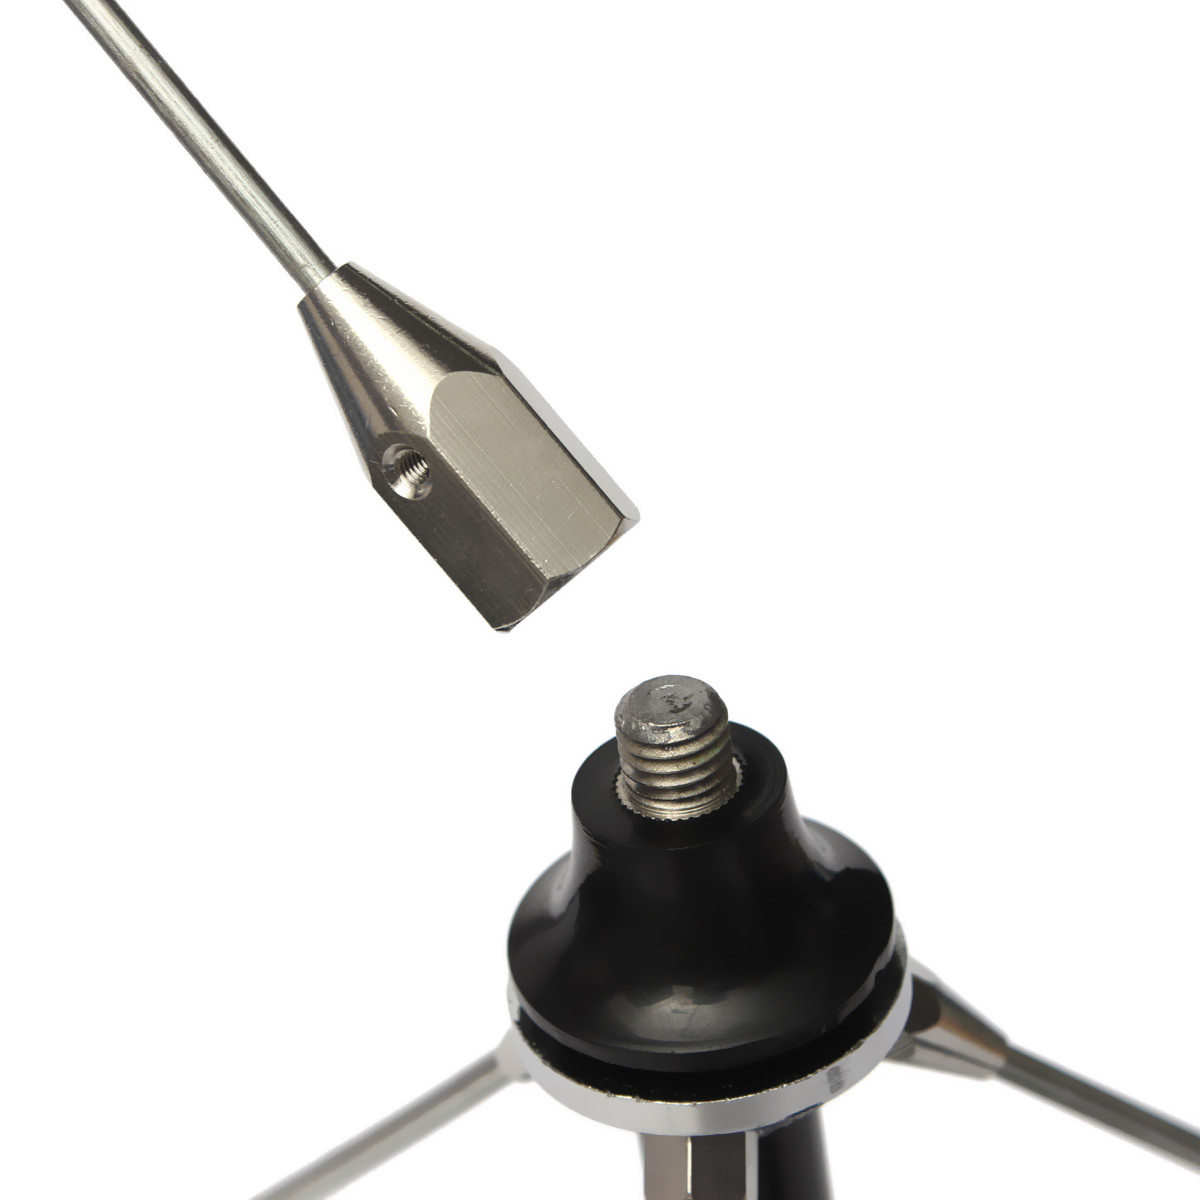 98Hz-VSWR-15-Professional-Stainless-Steel-FM-Transmitter-14-GP-Outdoor-Antenna-with-15M-Cable-1001516